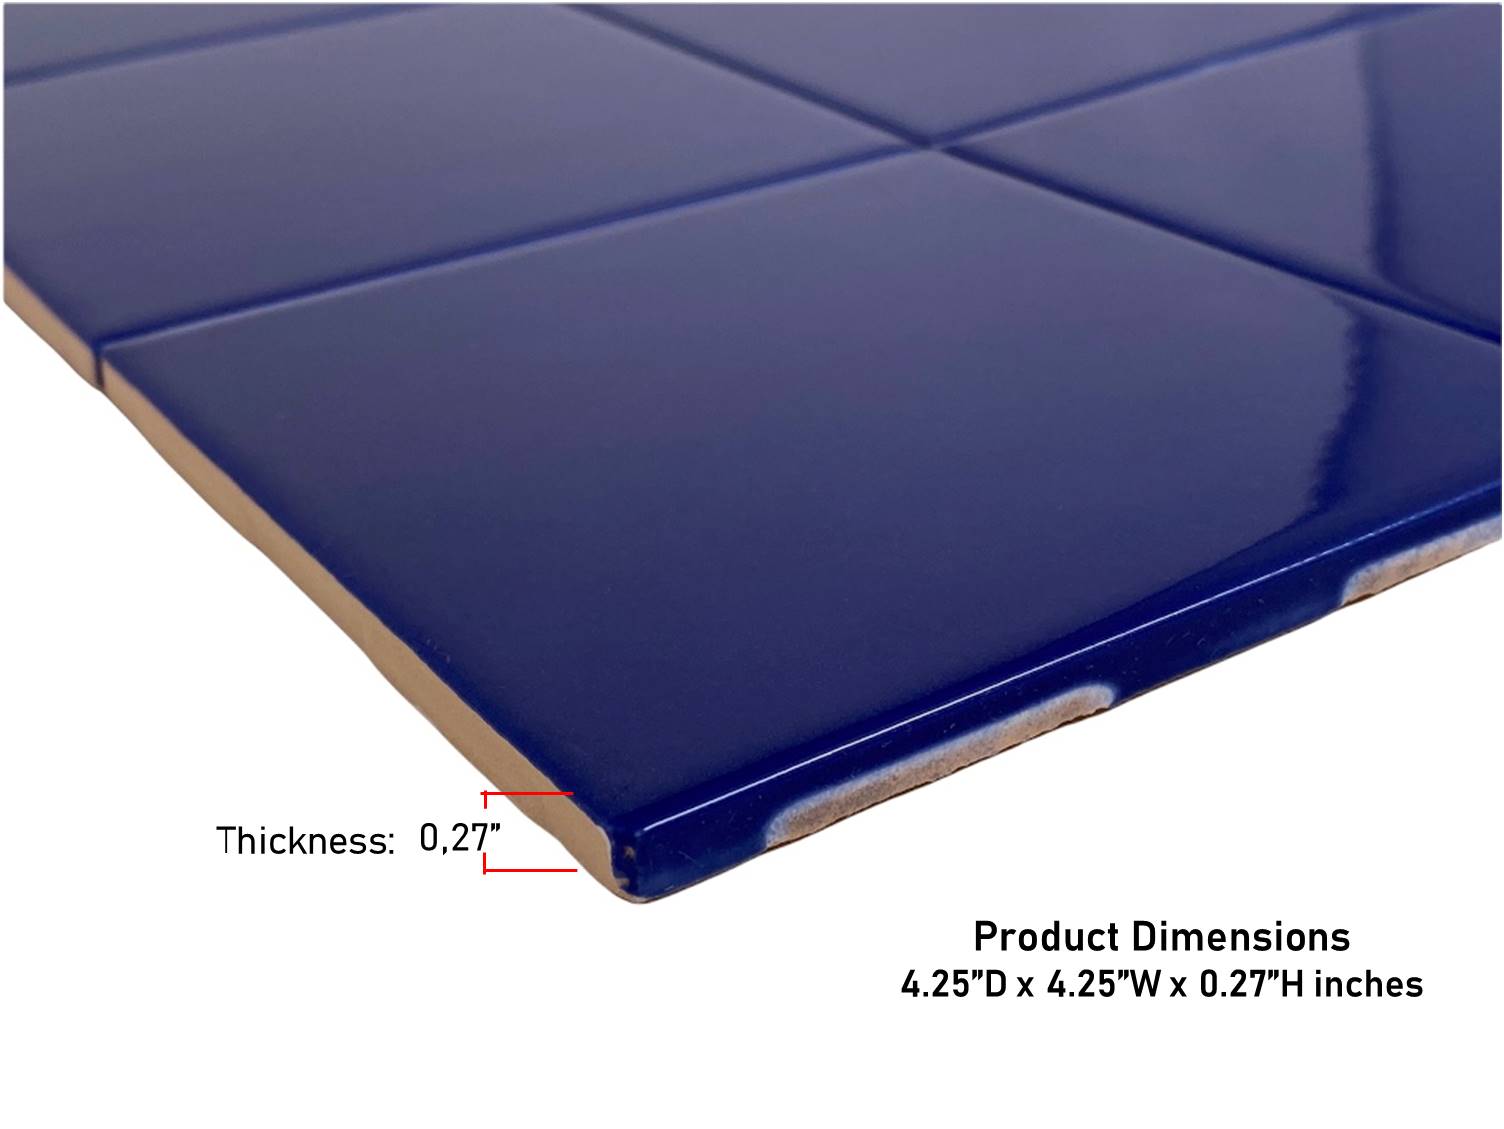 Cobalt Blue 4 in Ceramic Tile 4.25 inch Gloss (Shinny) 4 1/4" Box of 10 Piece for Bathroom Wall and Kitchen Backsplash